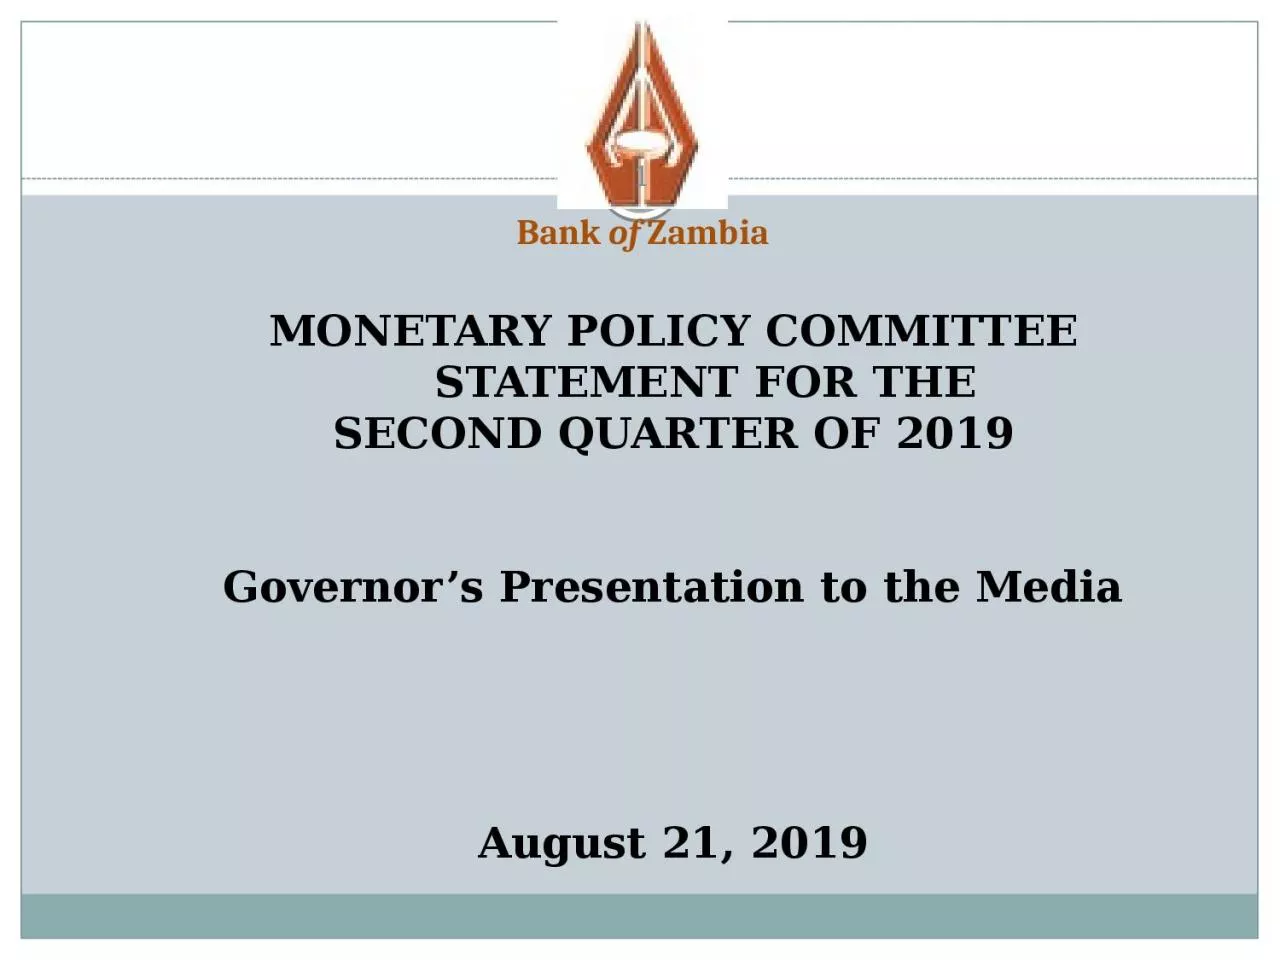 MONETARY POLICY COMMITTEE STATEMENT FOR THE